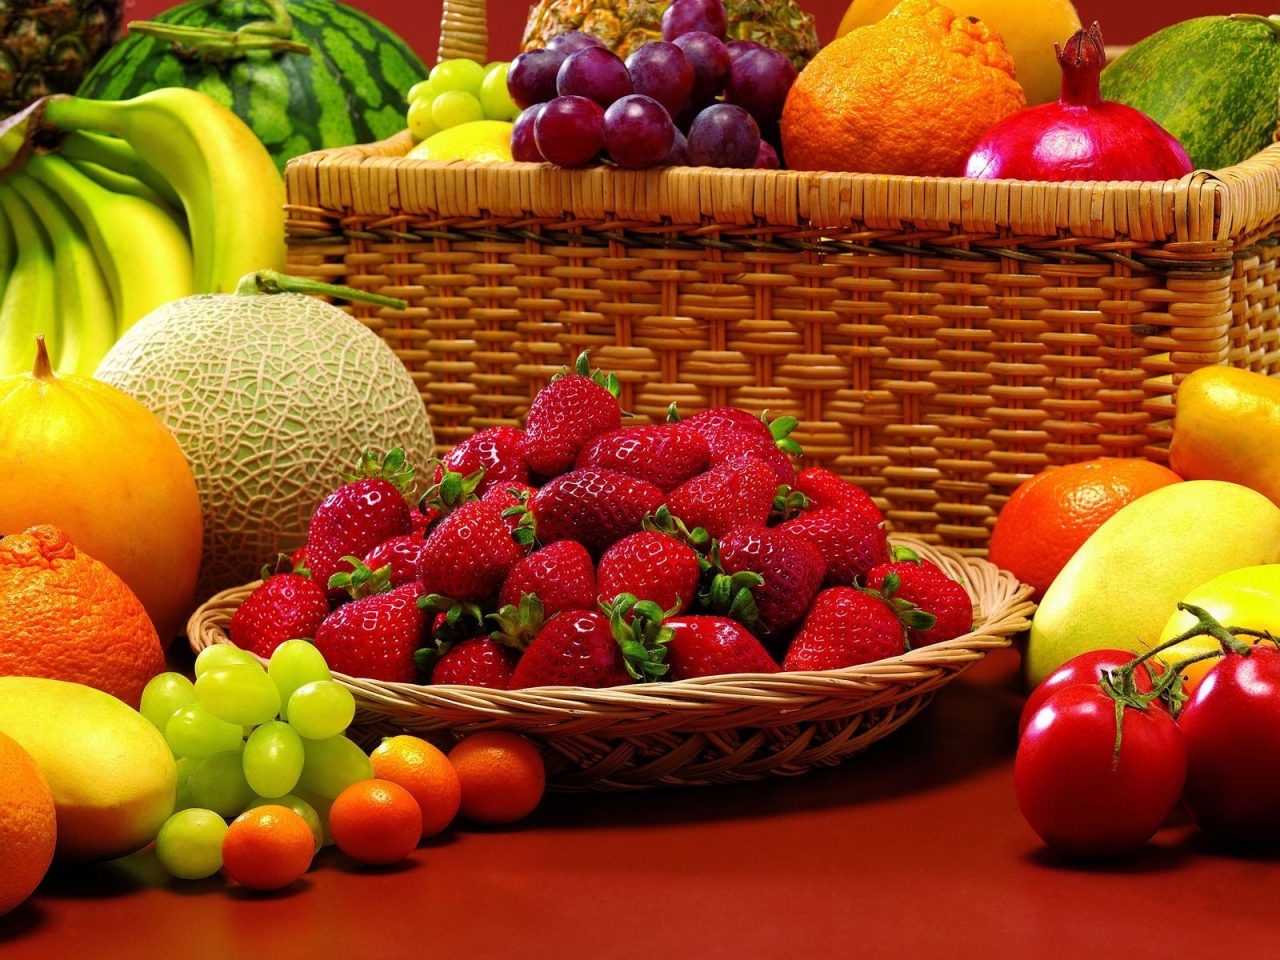 Amazing Fruits for 1280 x 960 resolution